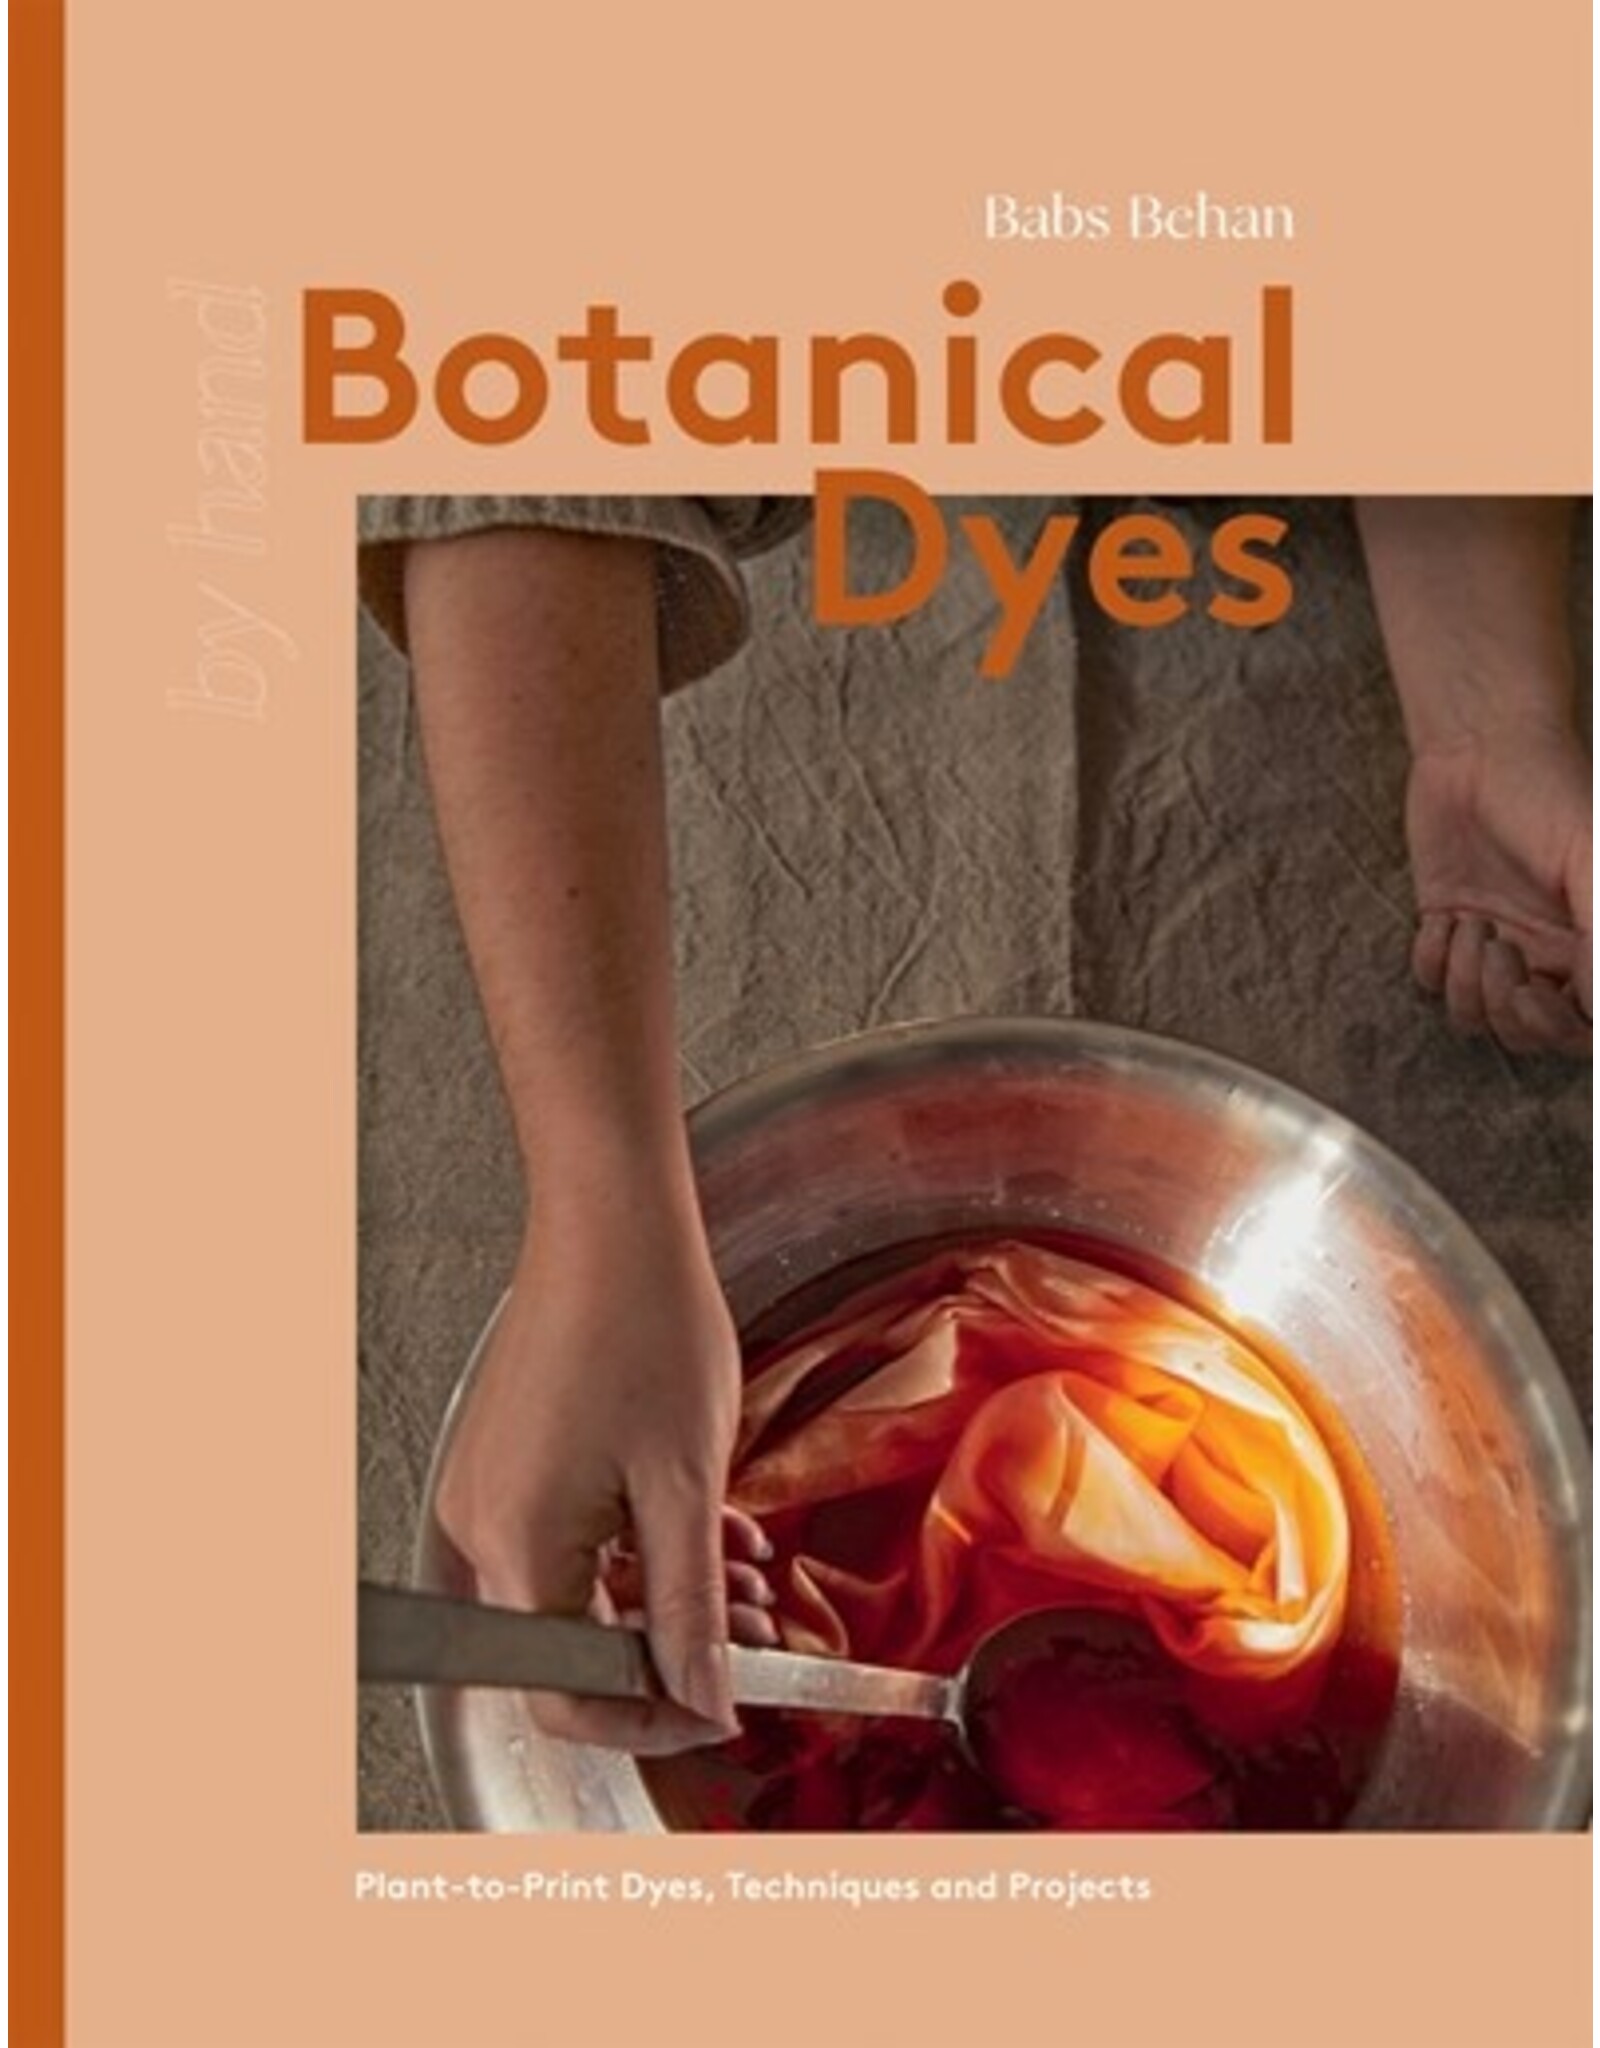 Books Bontanical Dyes : Plant - to - Print Dyes Techniques and Projects by Babs Behan